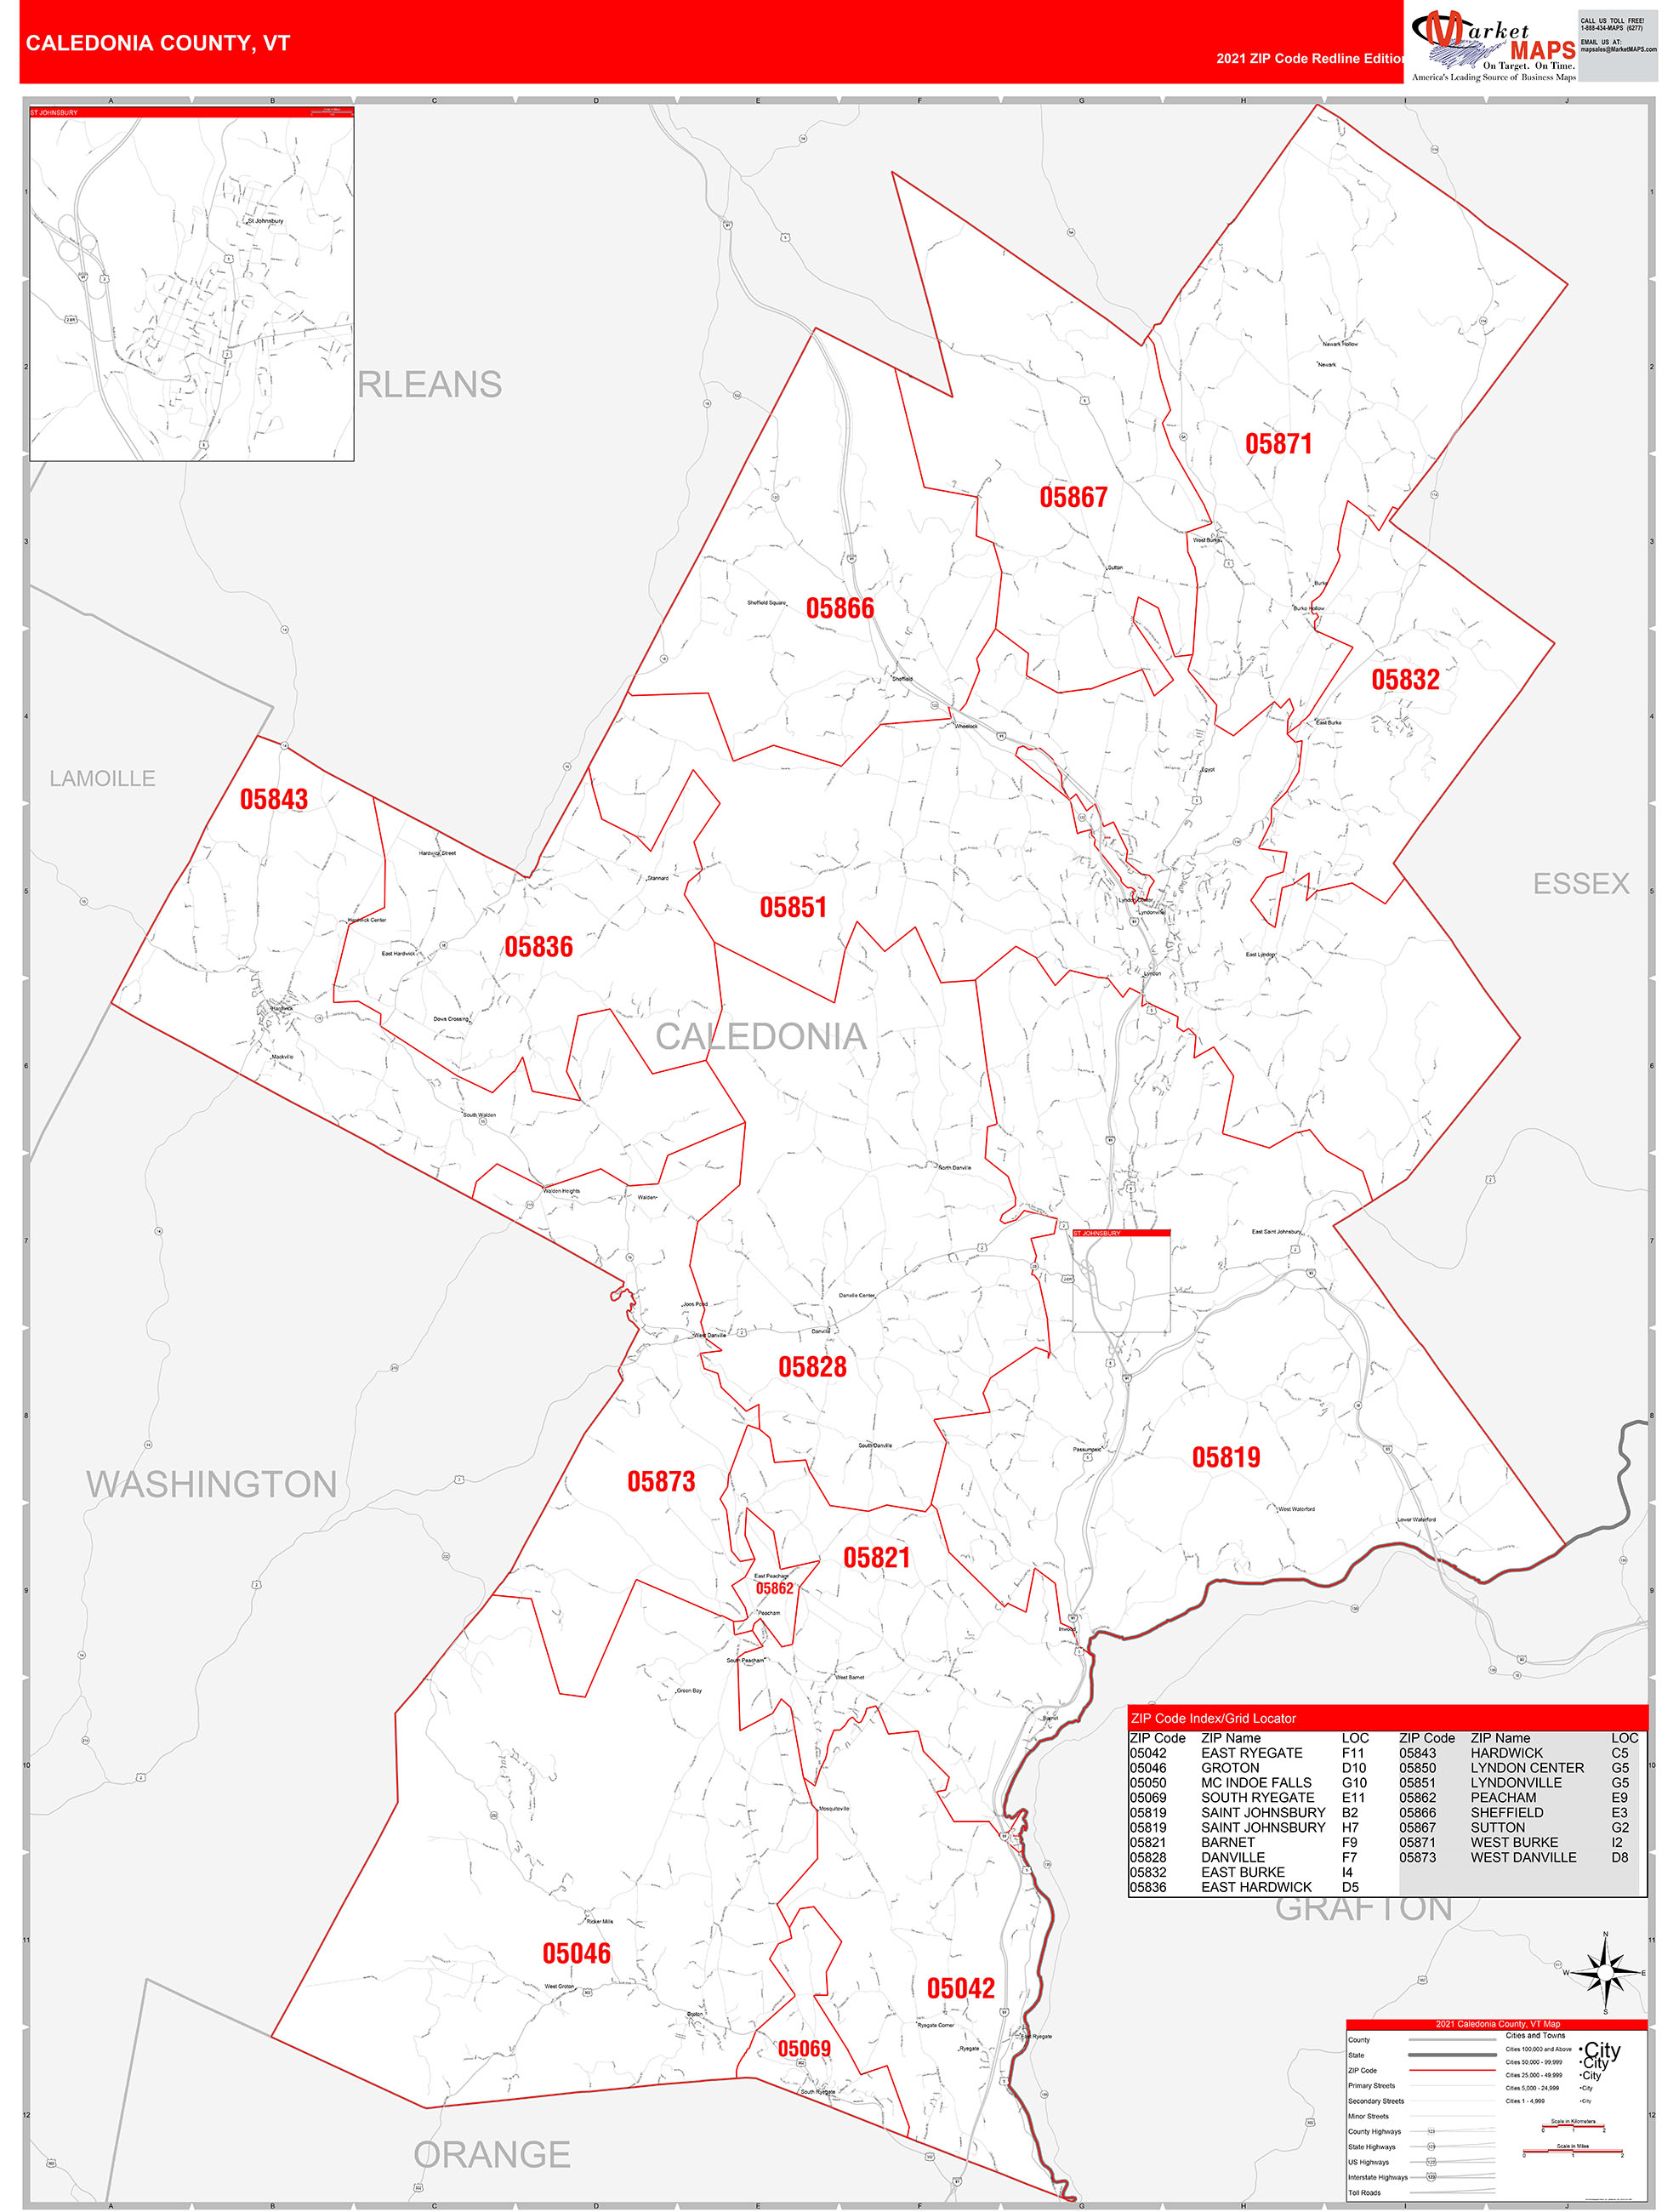 Caledonia County, VT Zip Code Wall Map Red Line Style by MarketMAPS